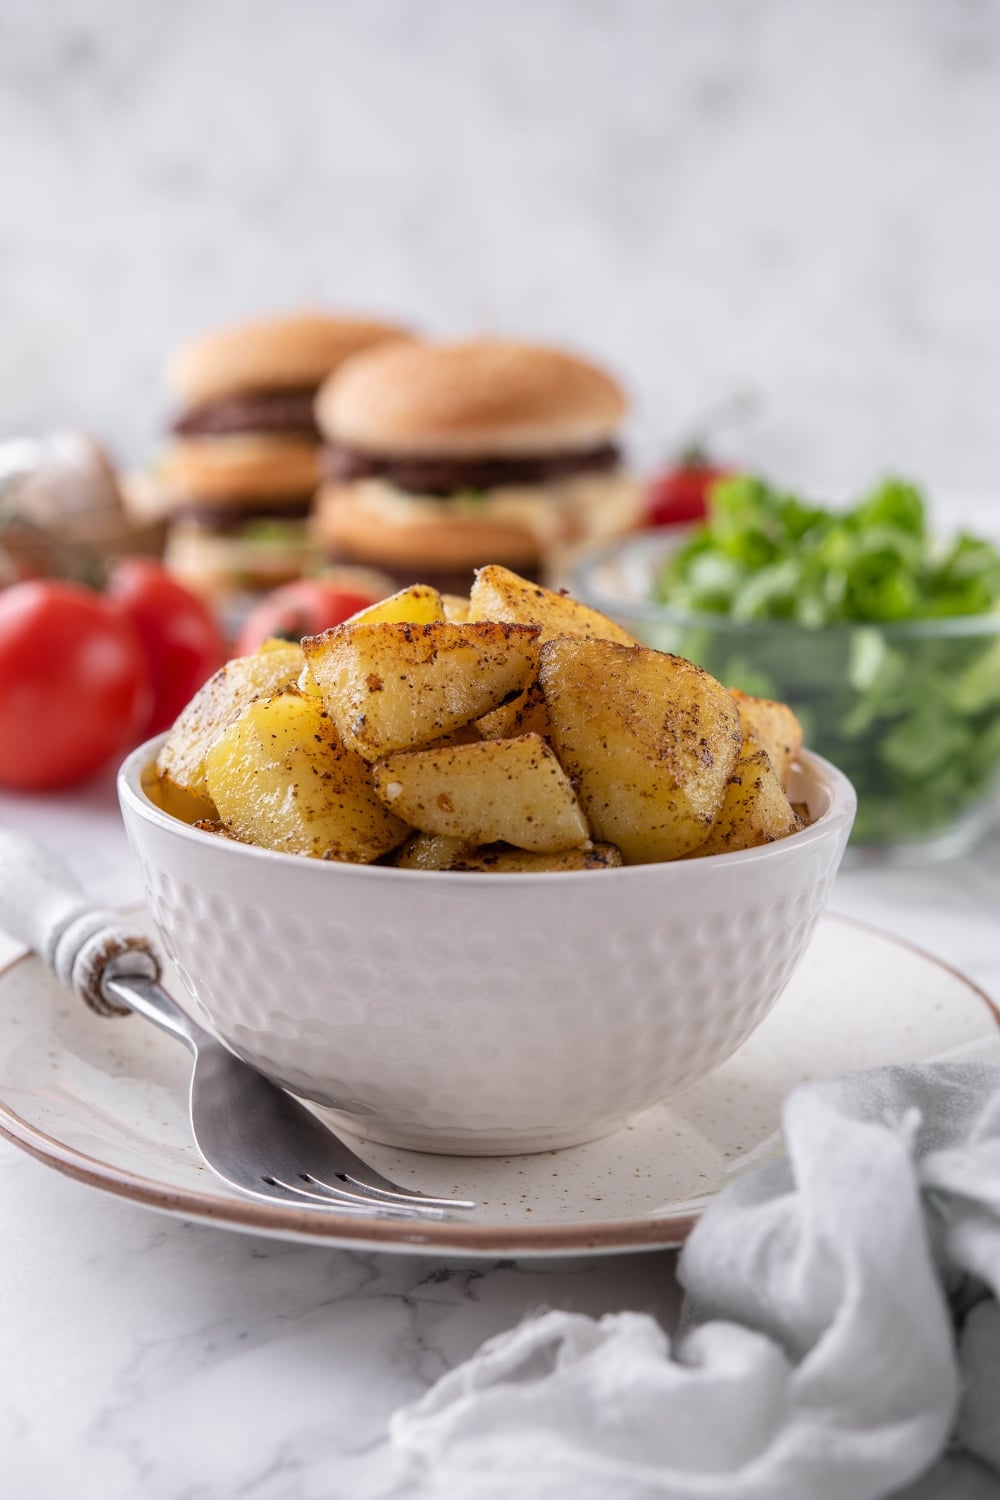 Sauteed chopped potatoes in a white bowl, set on a plate with a fork. Behind is a bowl of salad and some stacked hamburgers.